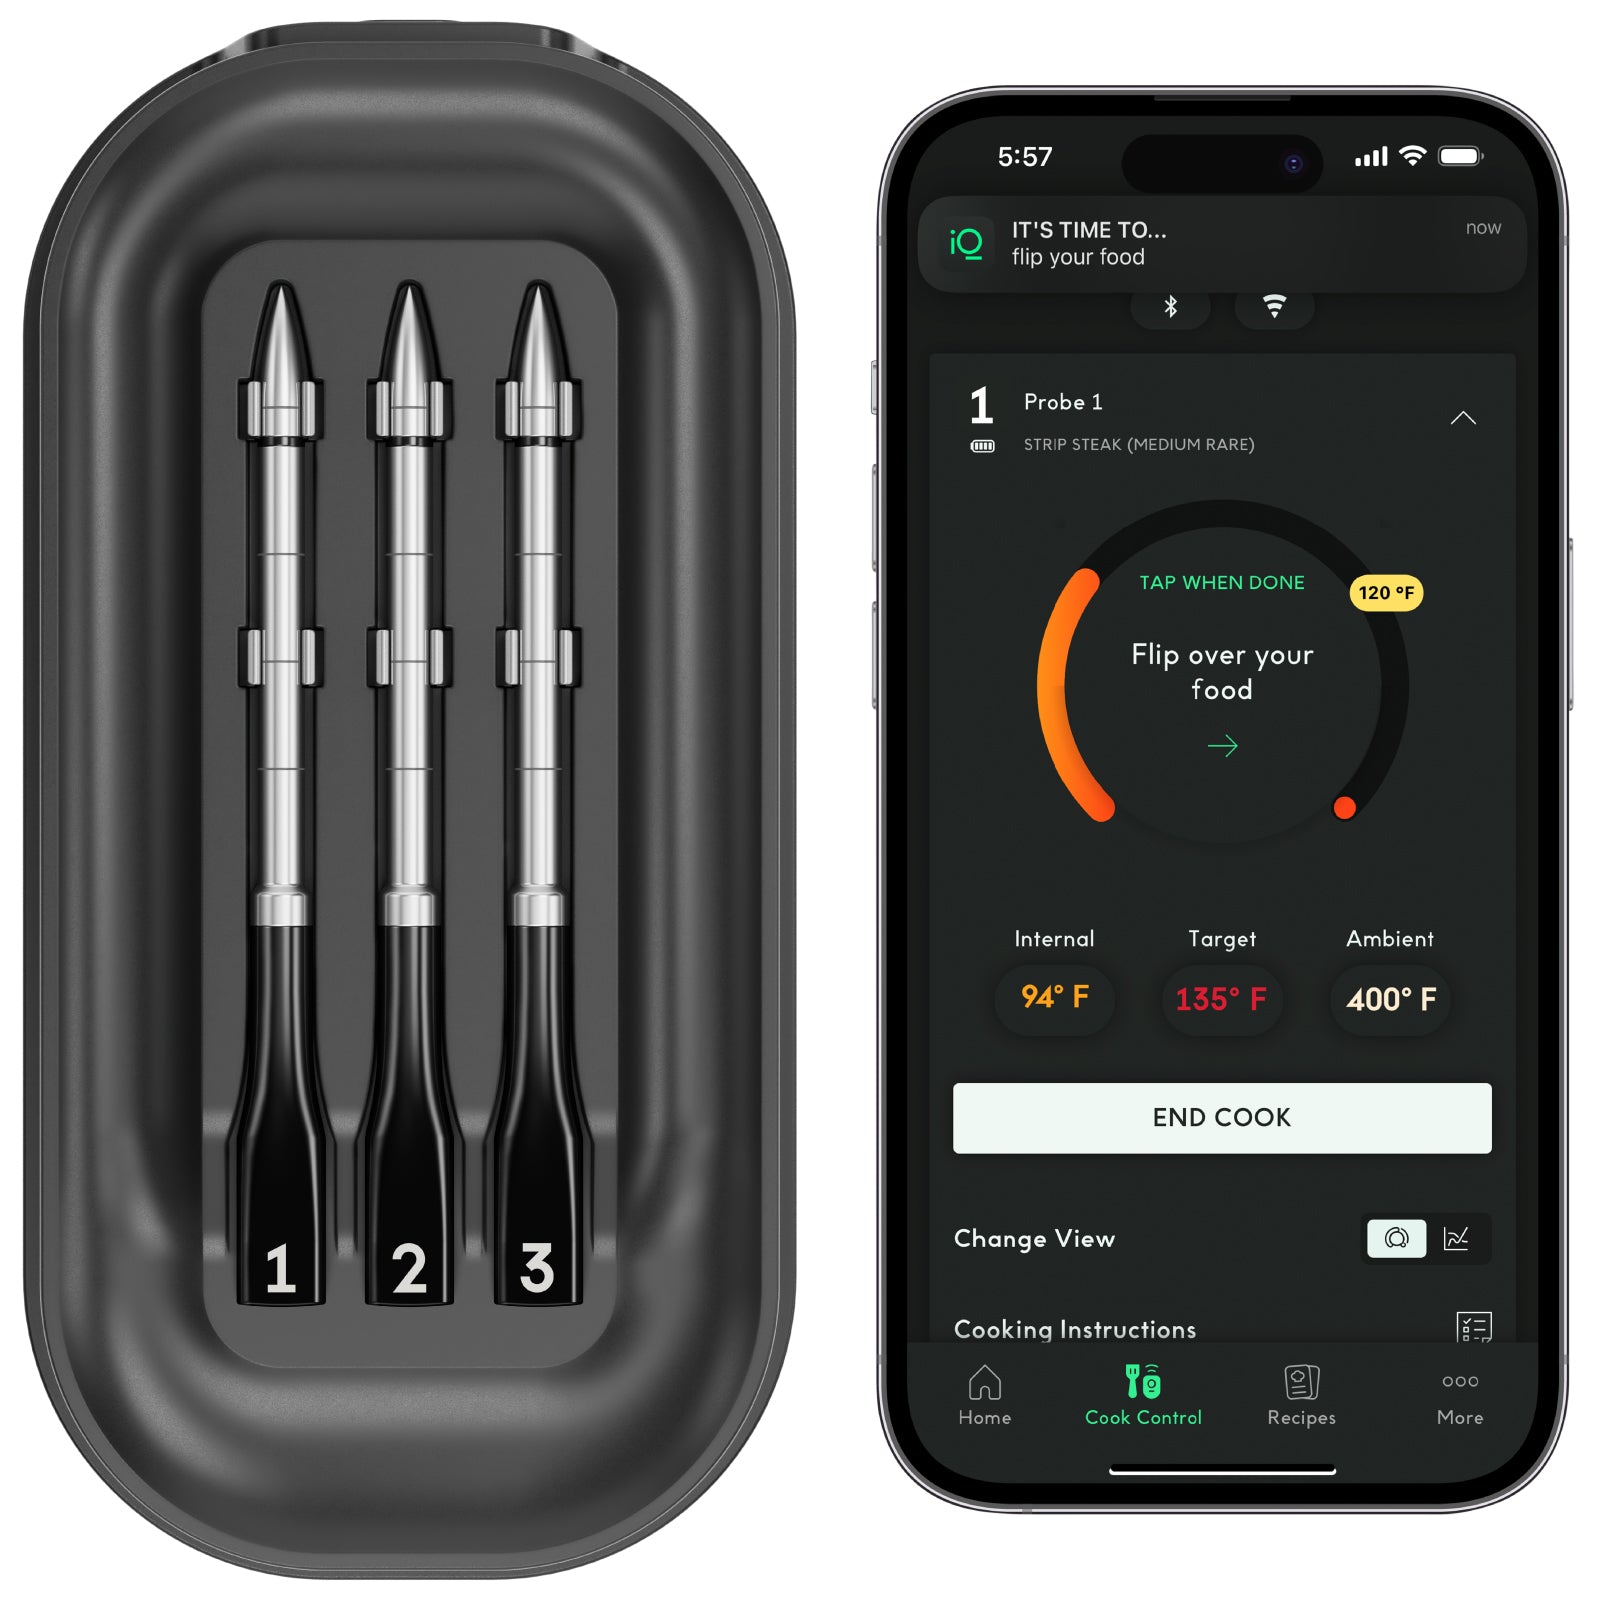 WiFi Pro Set, 2-Probe Package, Unlimited Range Wireless Meat Thermometer